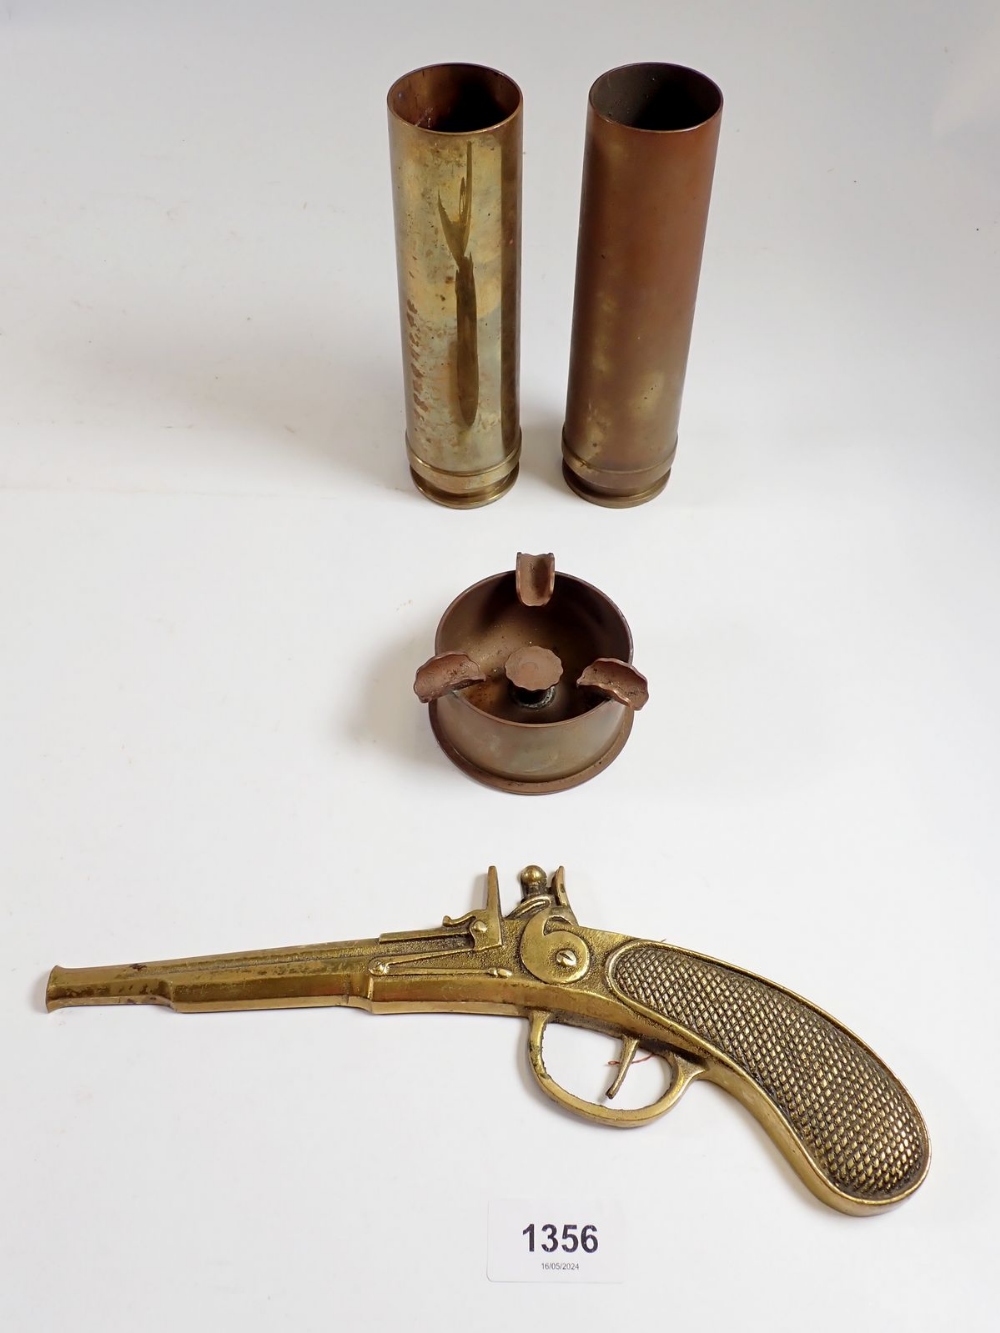 Two shell case vases and a trench art ashtray plus a gun wall ornament